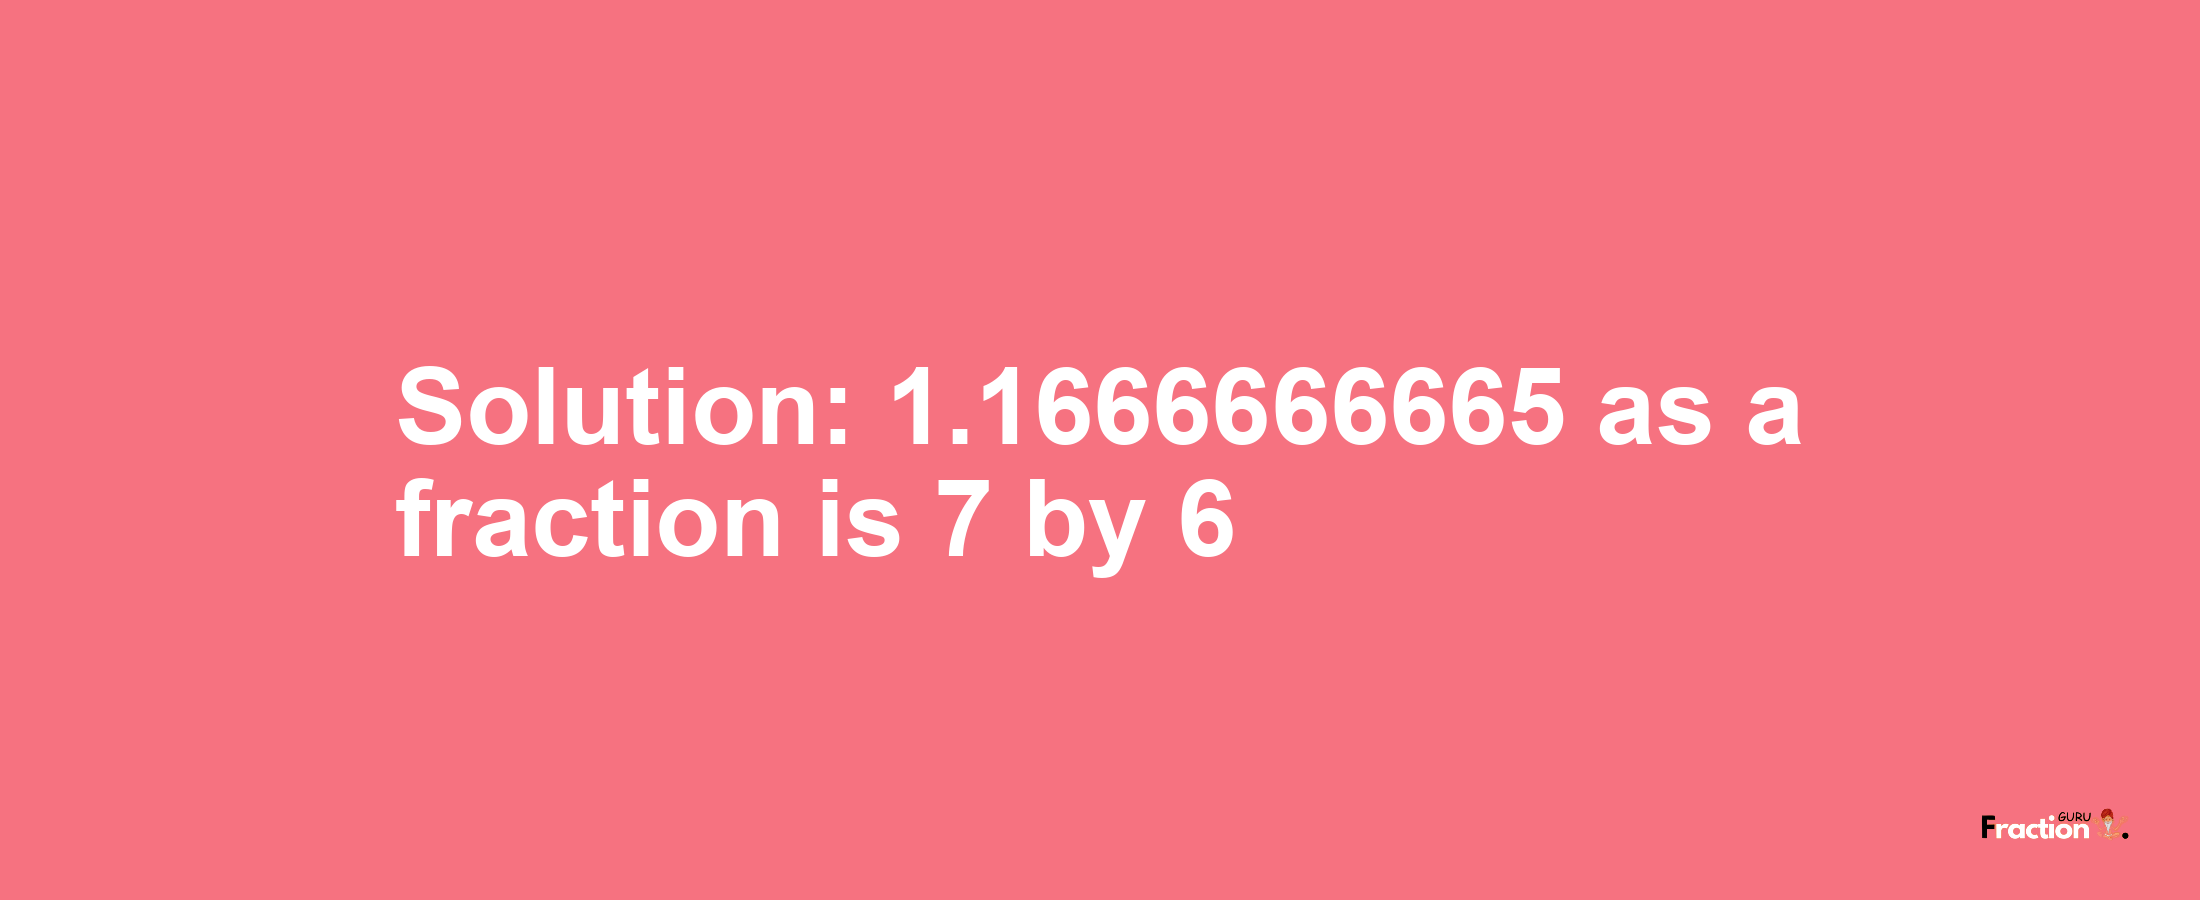 Solution:1.1666666665 as a fraction is 7/6